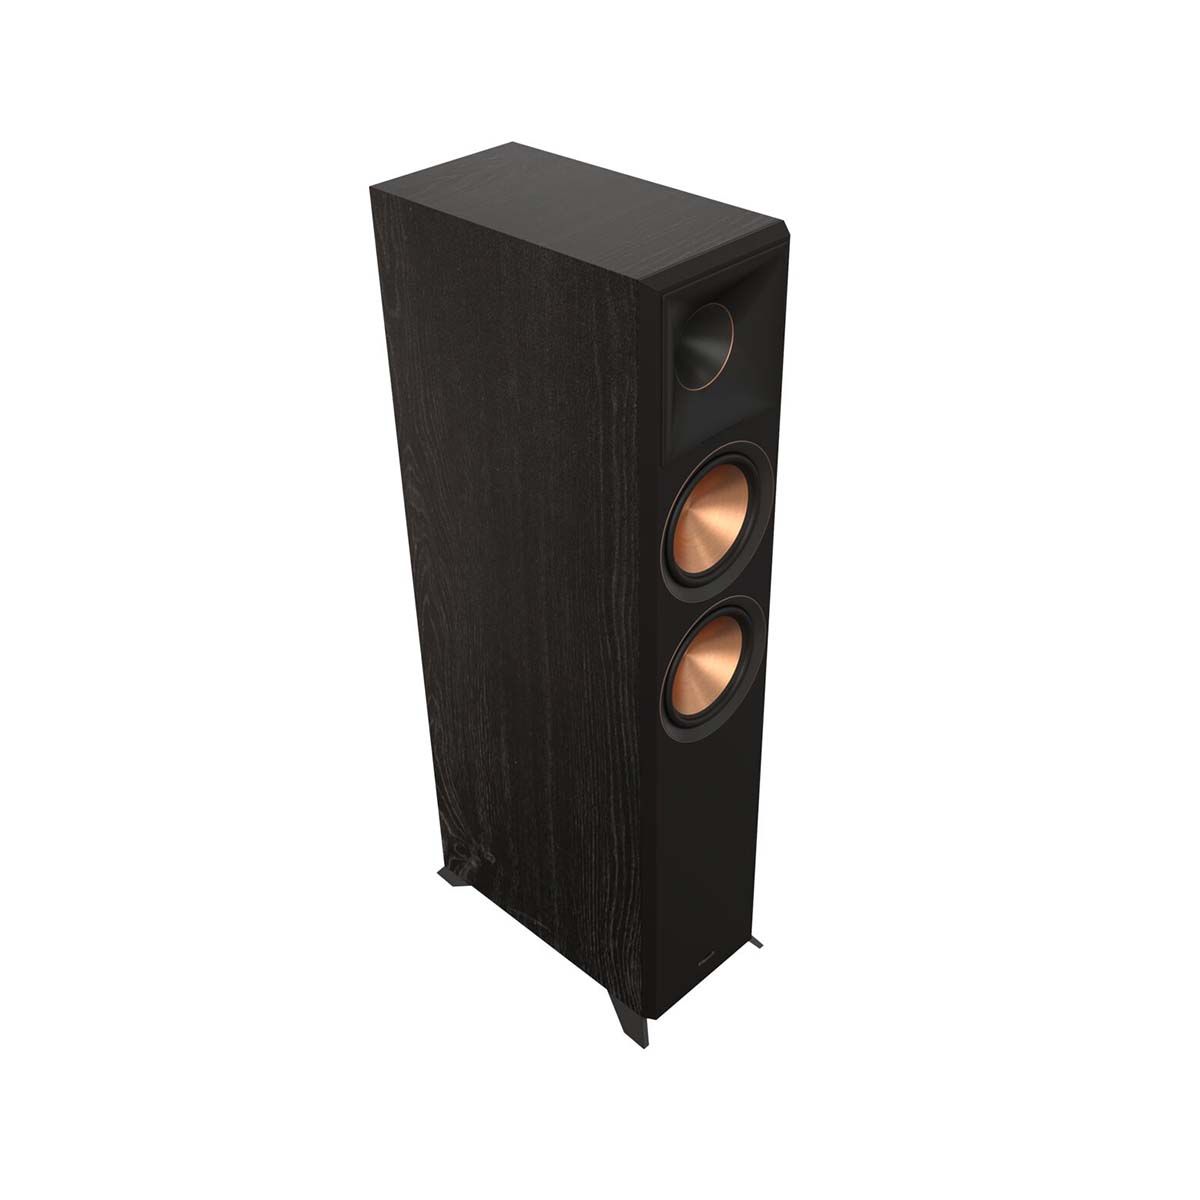 Klipsch RP-6000F II Floorstanding Speaker - Ebony - angled front view without grill